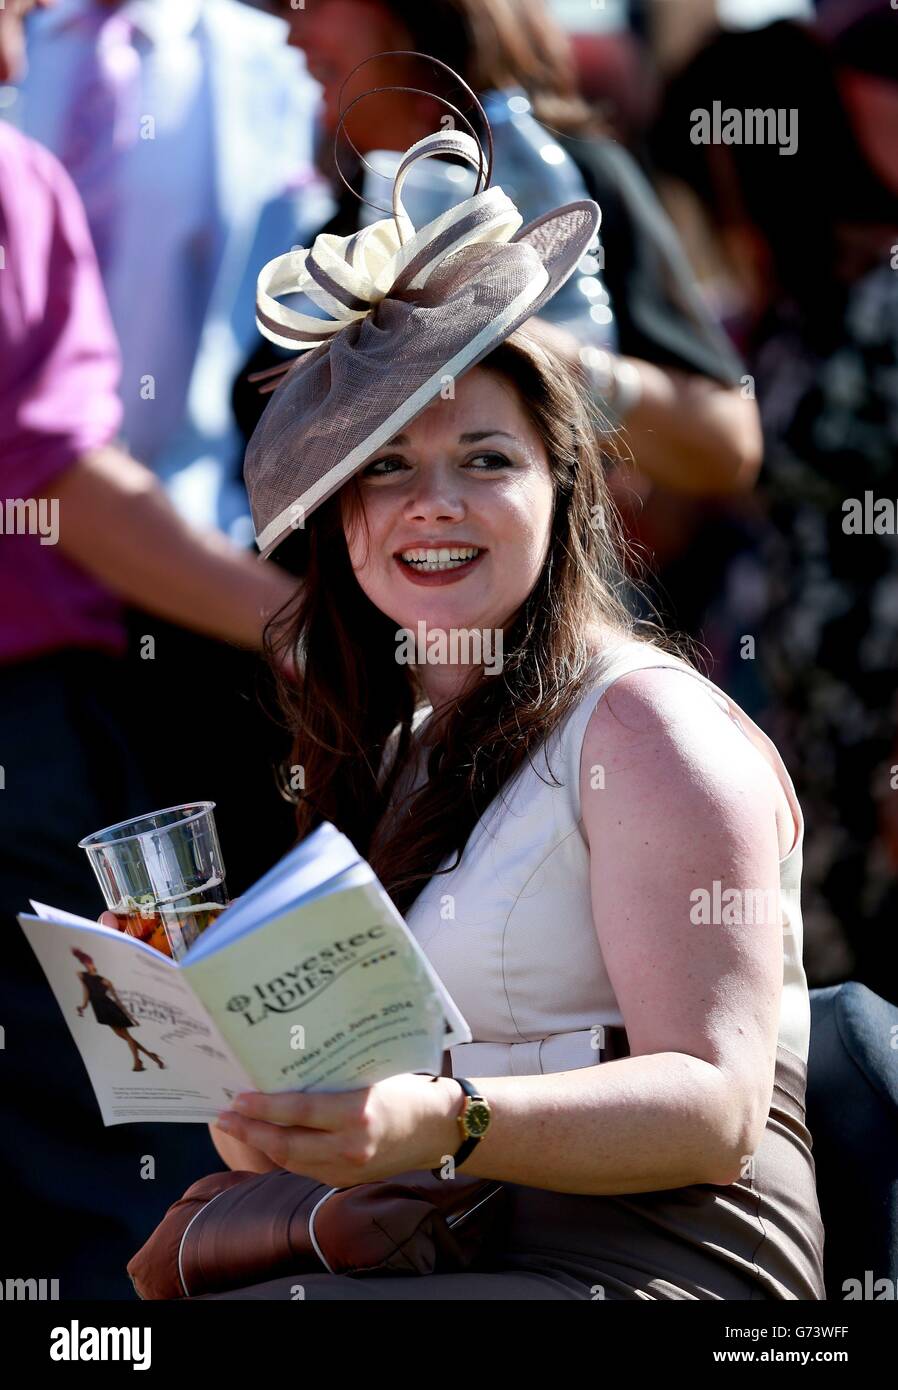 Horse Racing - Investec Ladies Day 2014 - Epsom Downs Racecourse. A race goer enjoys the racing during Investec Ladies Day at Epsom Downs Racecourse, Surrey. Stock Photo